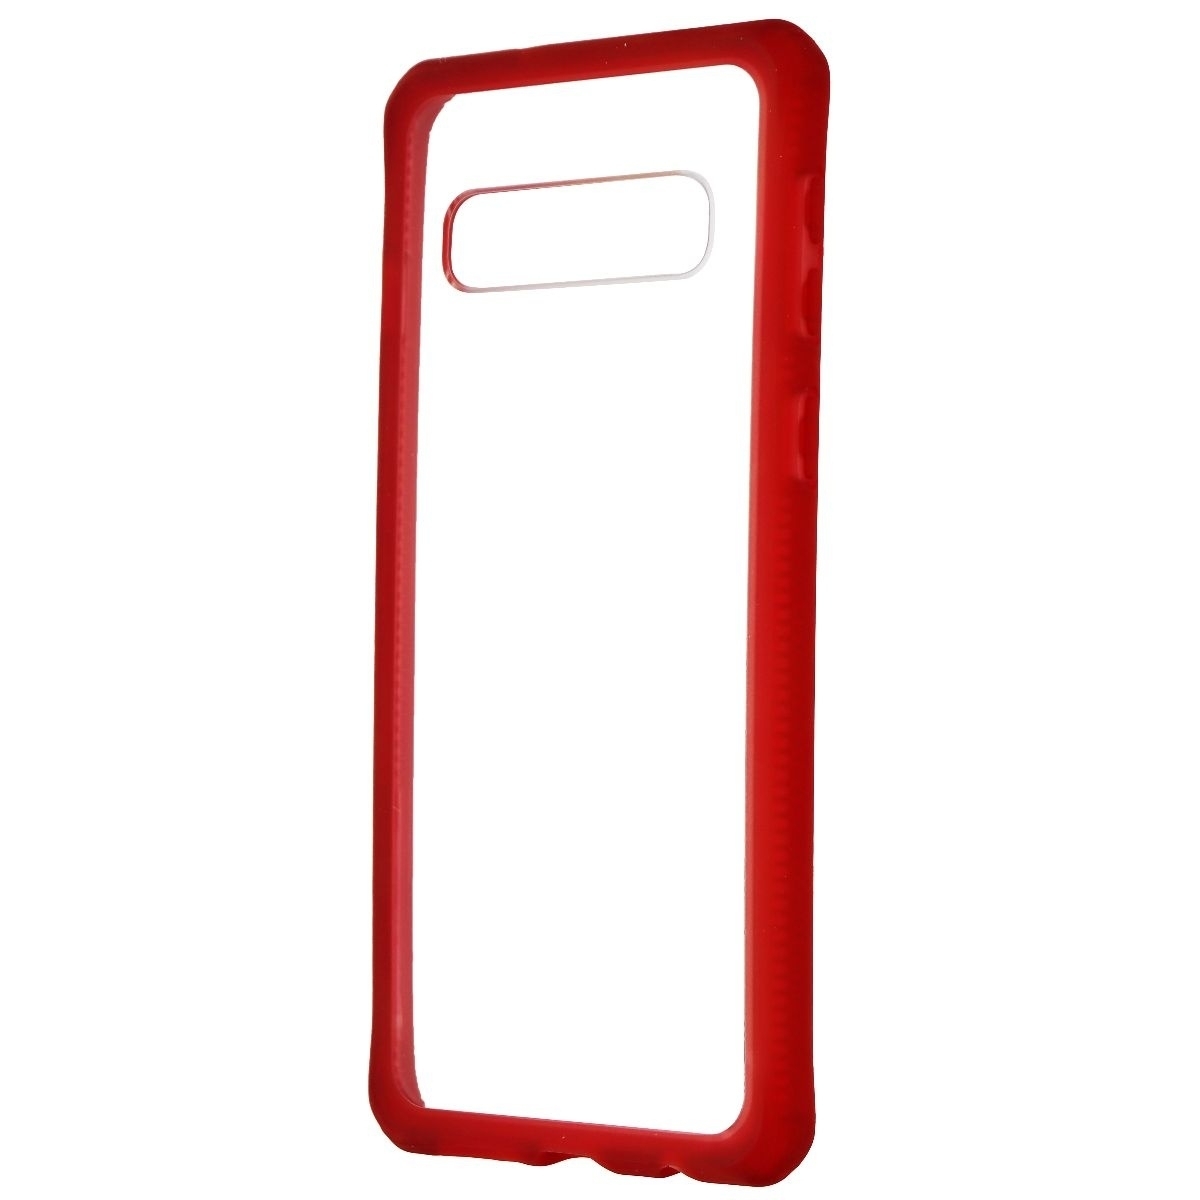 ITSKINS Hybrid Frost Series Case For Samsung Galaxy S10 - Red And Transparent